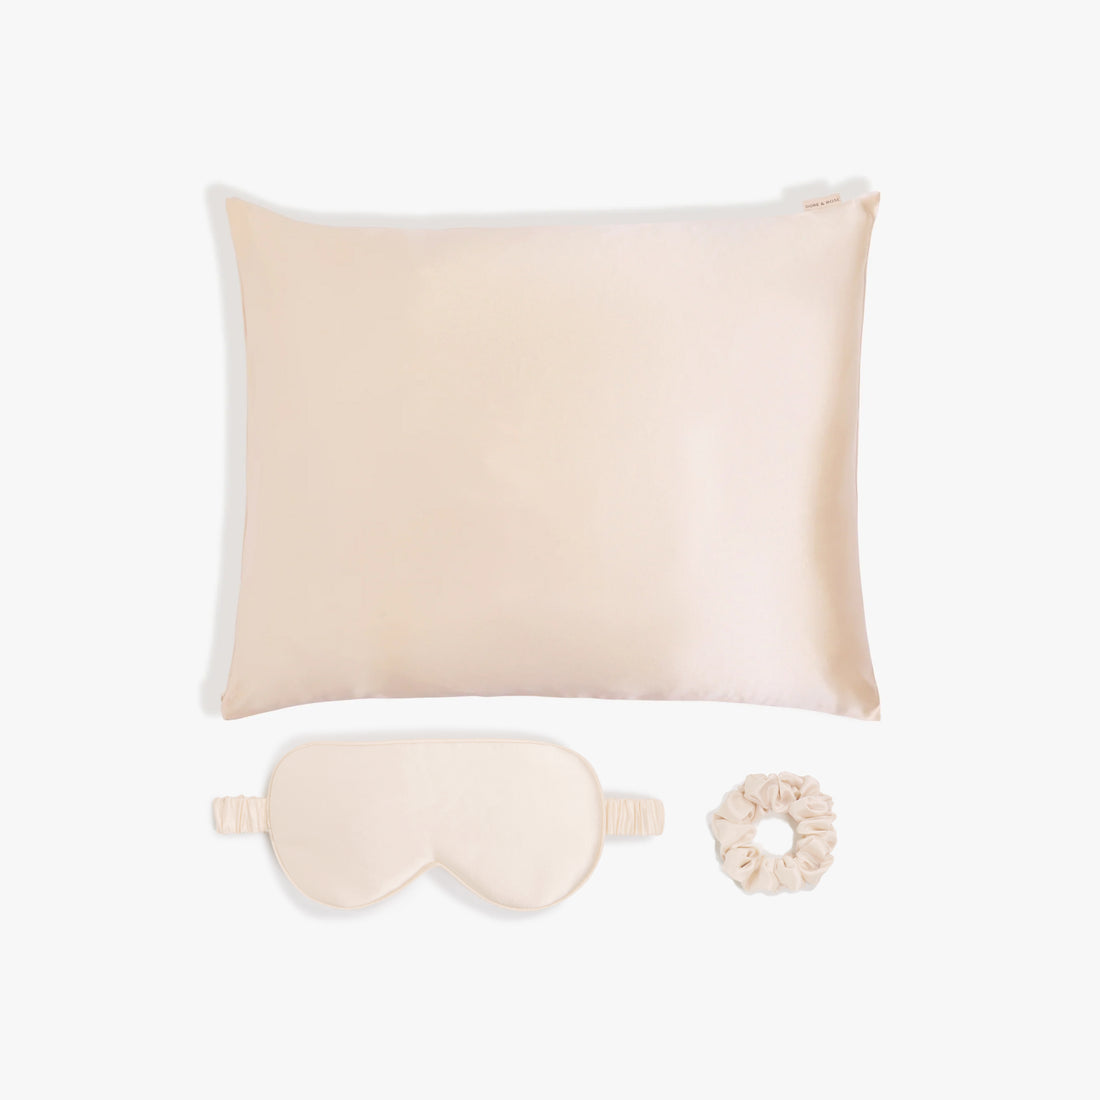 Skin Recovering™ Sleep Bundle with Pillowcase. Eye Mask and Scrunchie from Dore and Rose in the color Champagne Beige